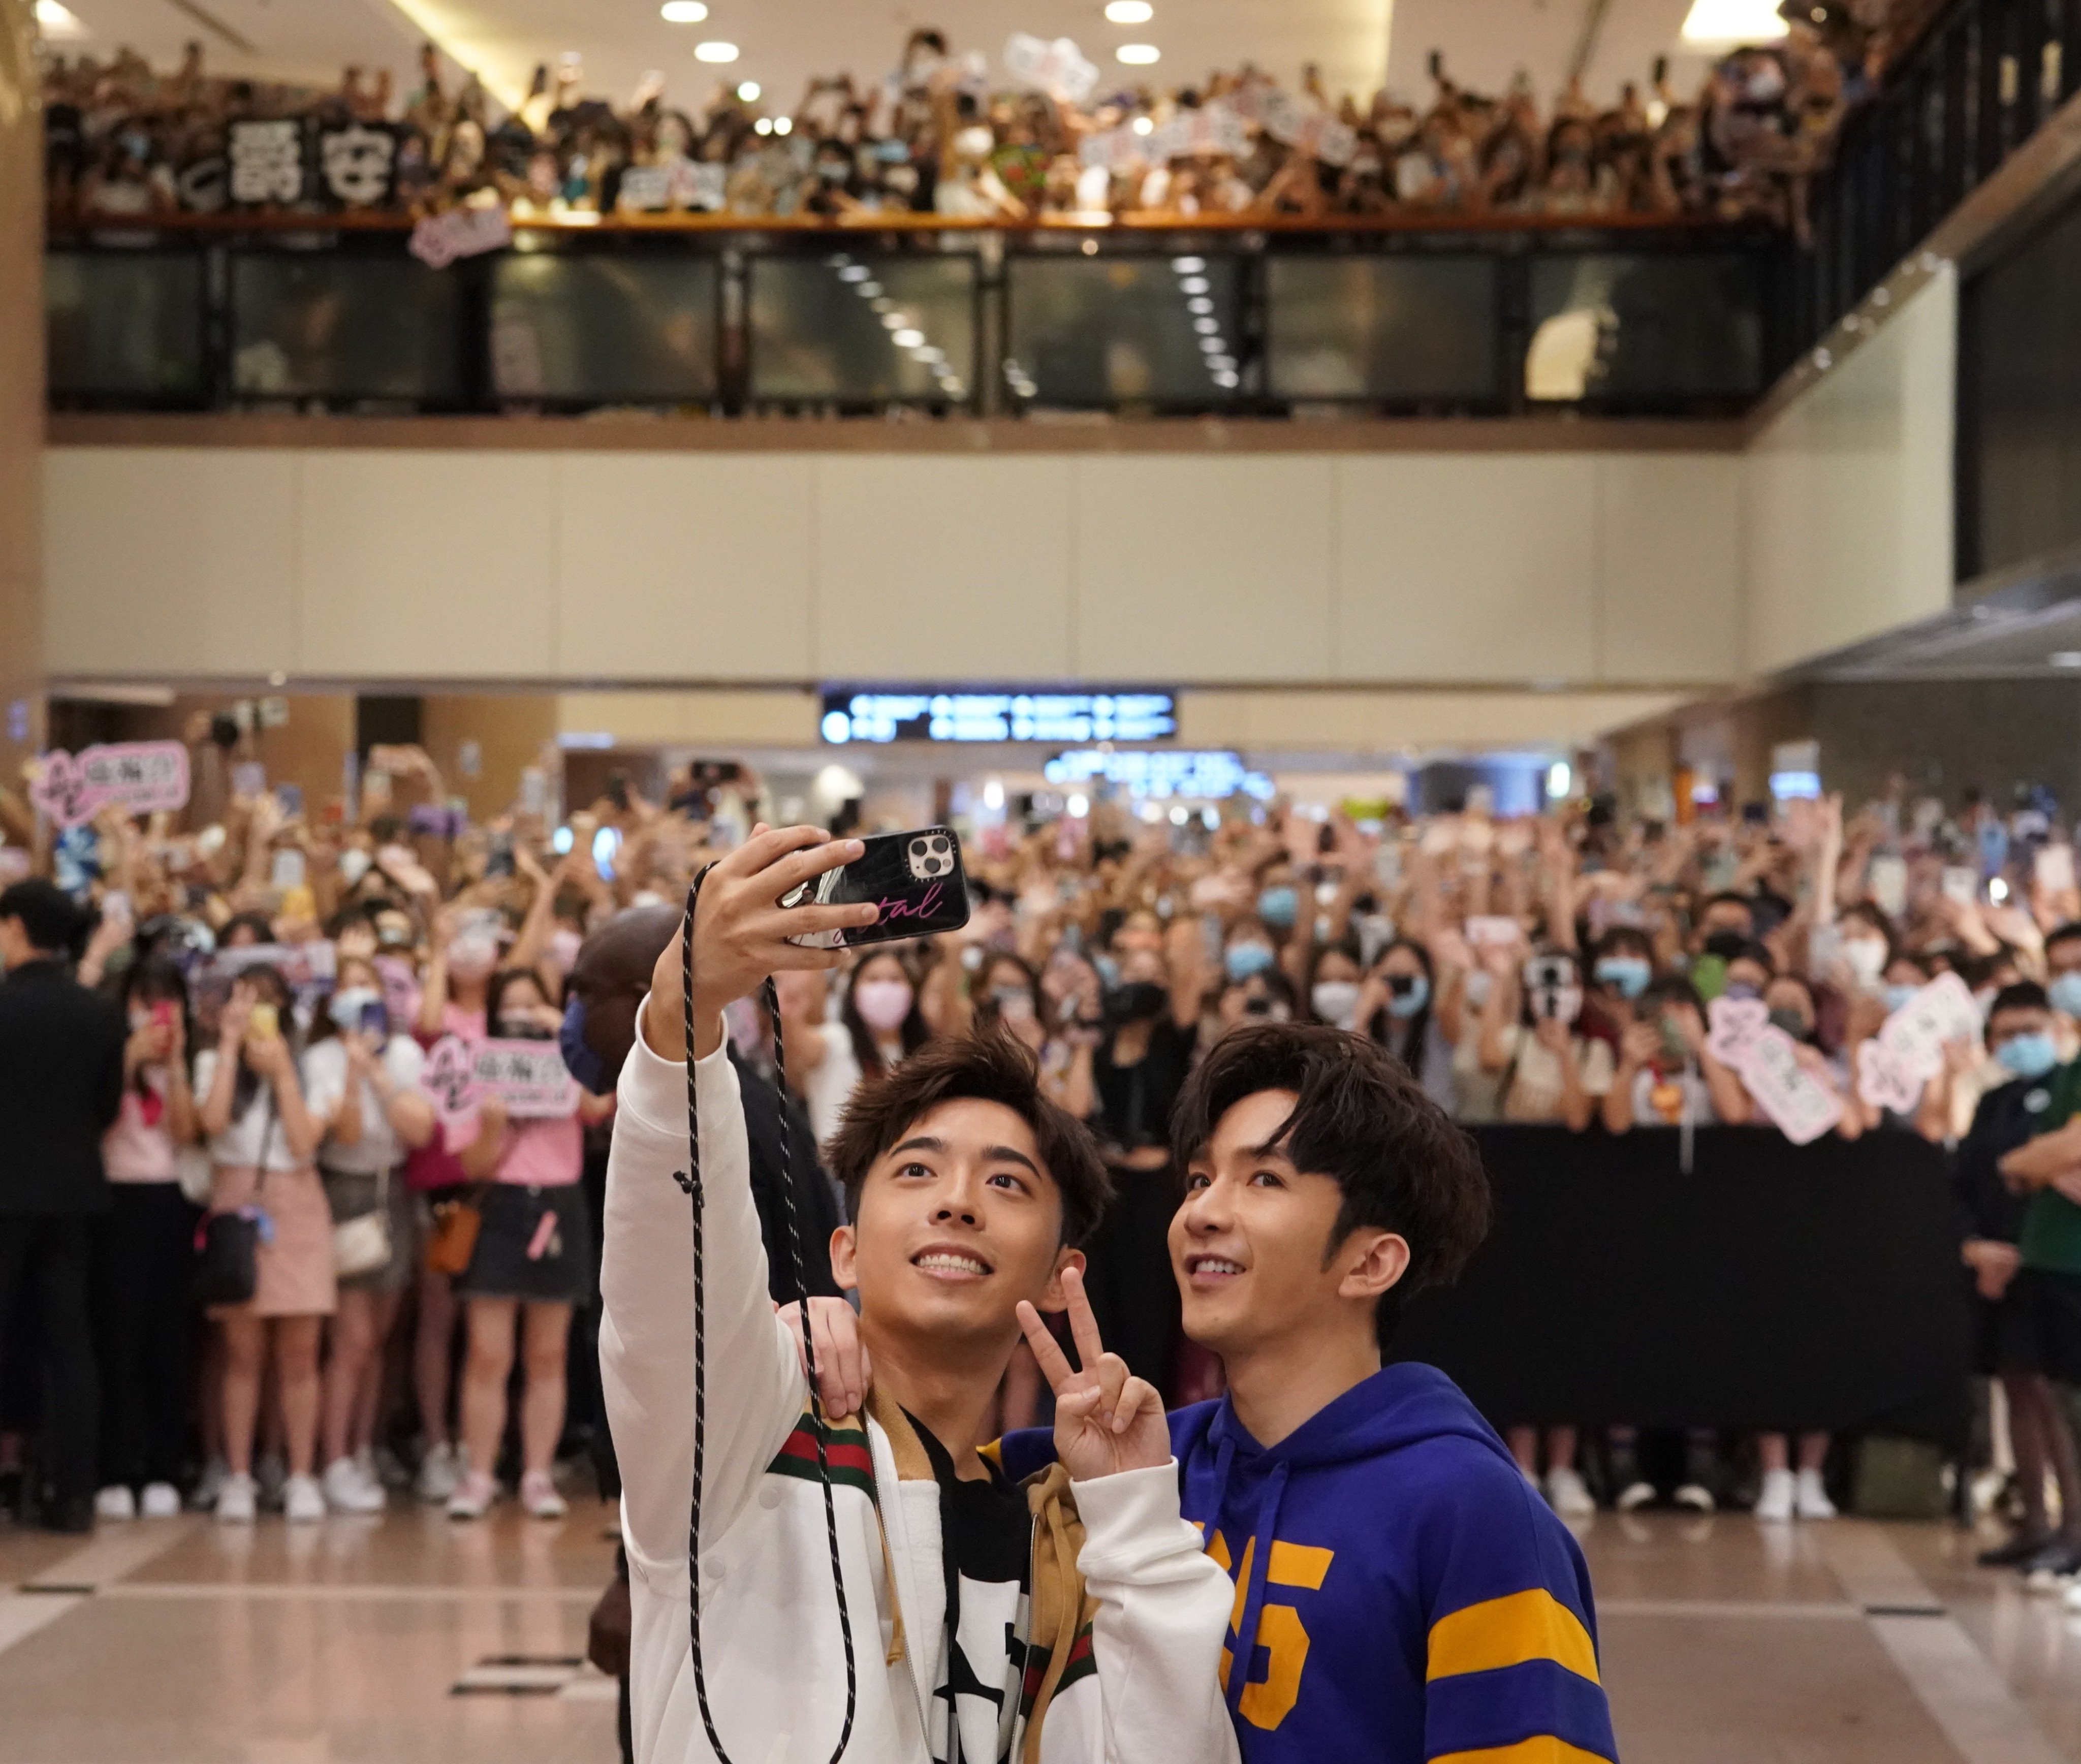 Edan Lui (left) and Anson Lo of boy band Mirror meet their adoring fans at a Gucci store in Harbour City, Tsim Sha Tsui. Luxury brands have flocked to use the Canto-pop group’s fame and popularity in marketing campaigns in 2021. Photo: Felix Wong